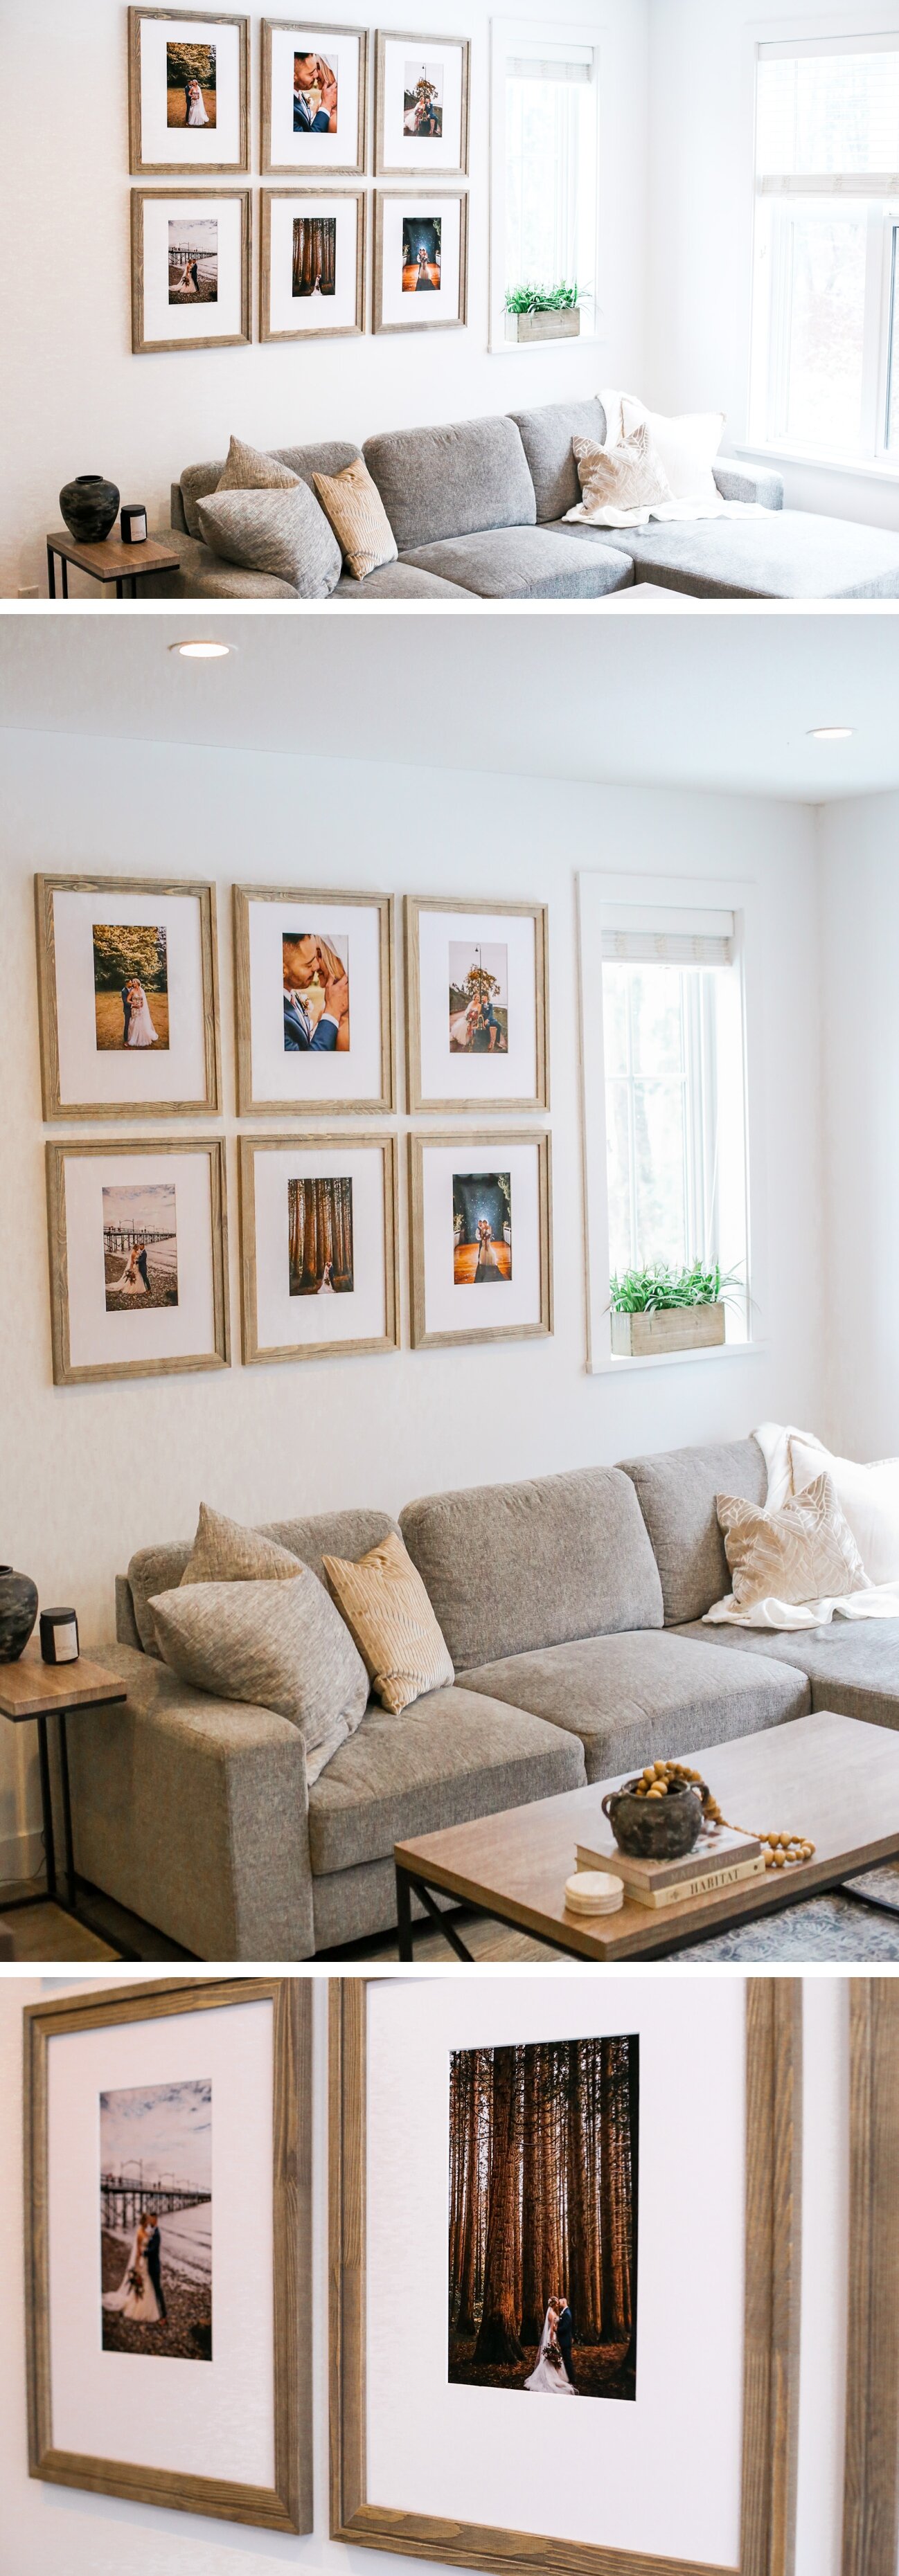 Gallery Wall Template Offset Oversized Mat Ramsborg Frames Kendra Found It